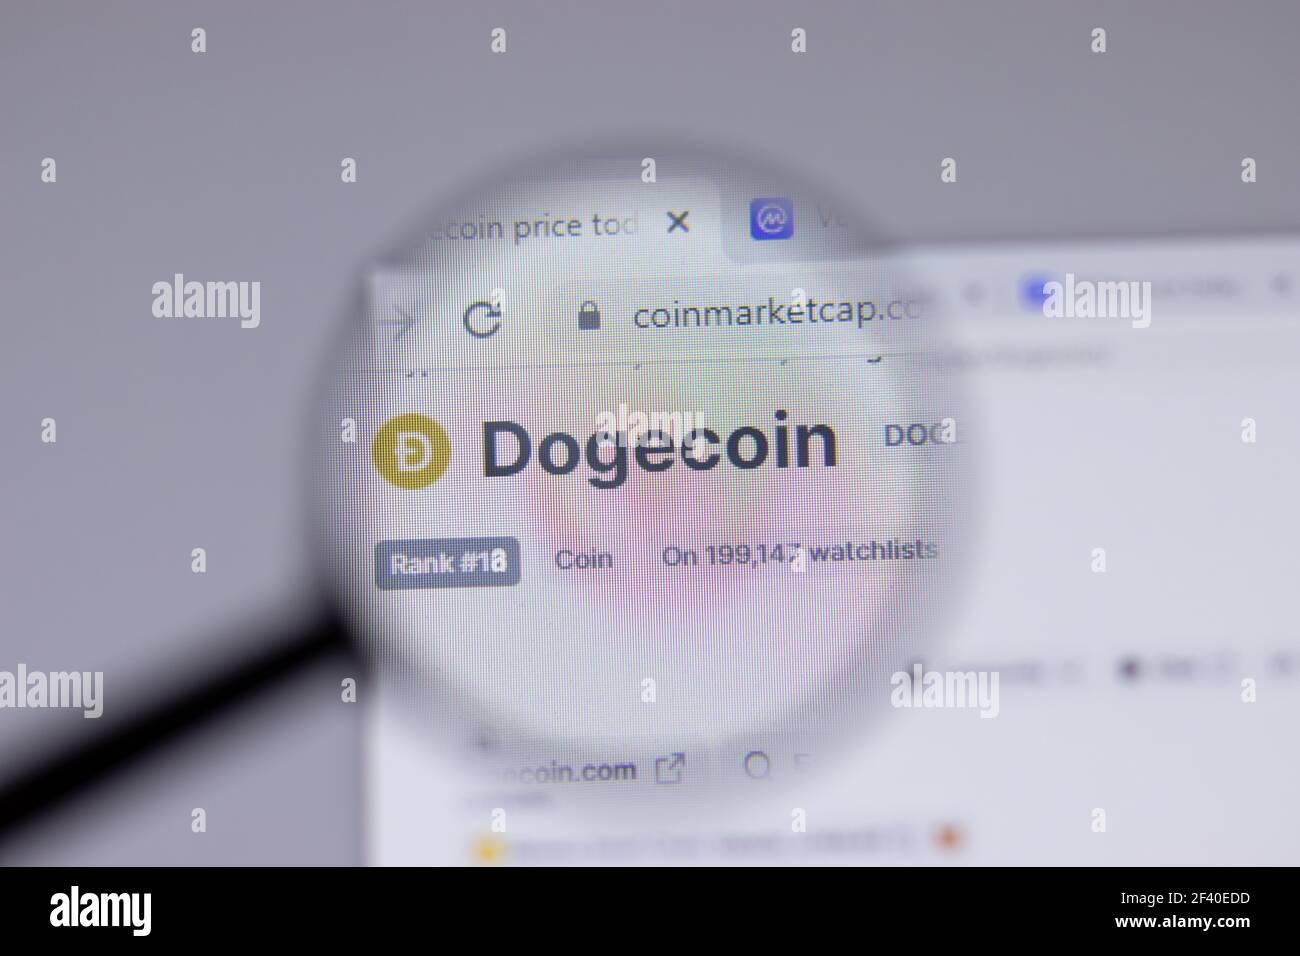 Dogecoin Stock Symbol - Cryptocurrency Trading News ...